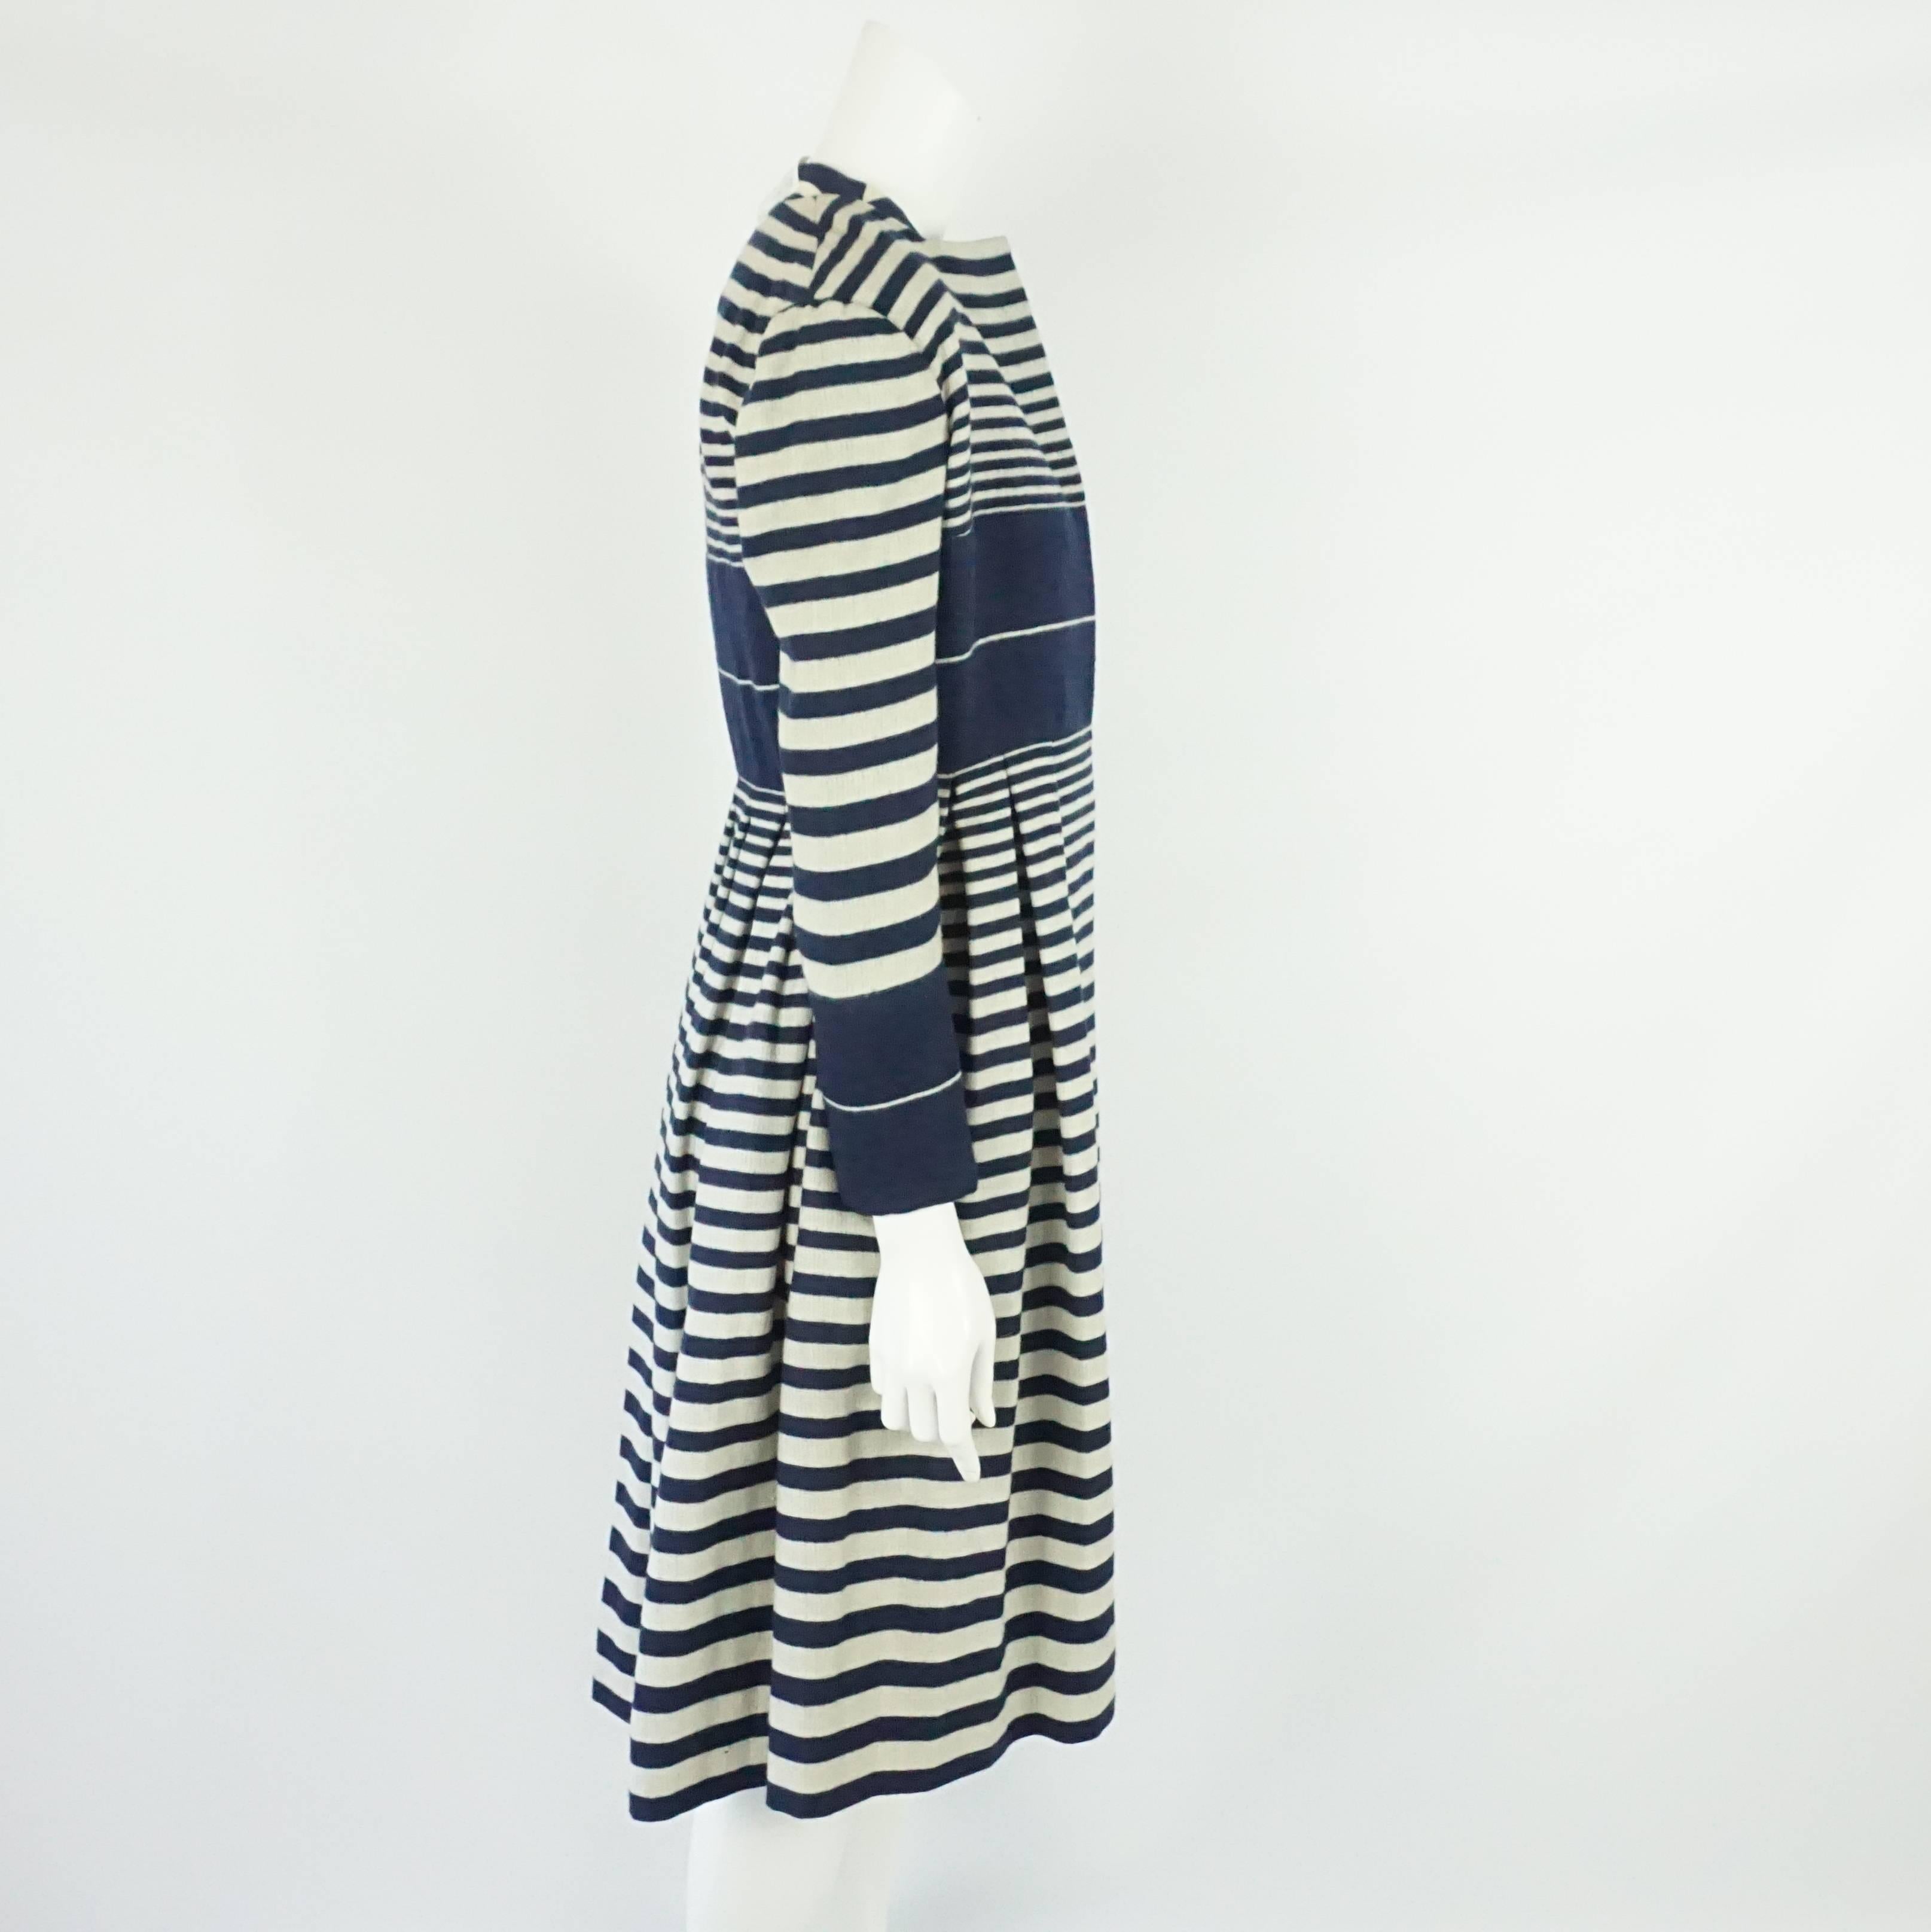 Pauline Trigere Navy and Ivory Striped Wool Dress, Coat, and Belt - 8- Circa 60s. This fun set features a striped, sleeveless dress with a silver metal charm on the front. The matching coat is fitted until the waist and then has pleats from the